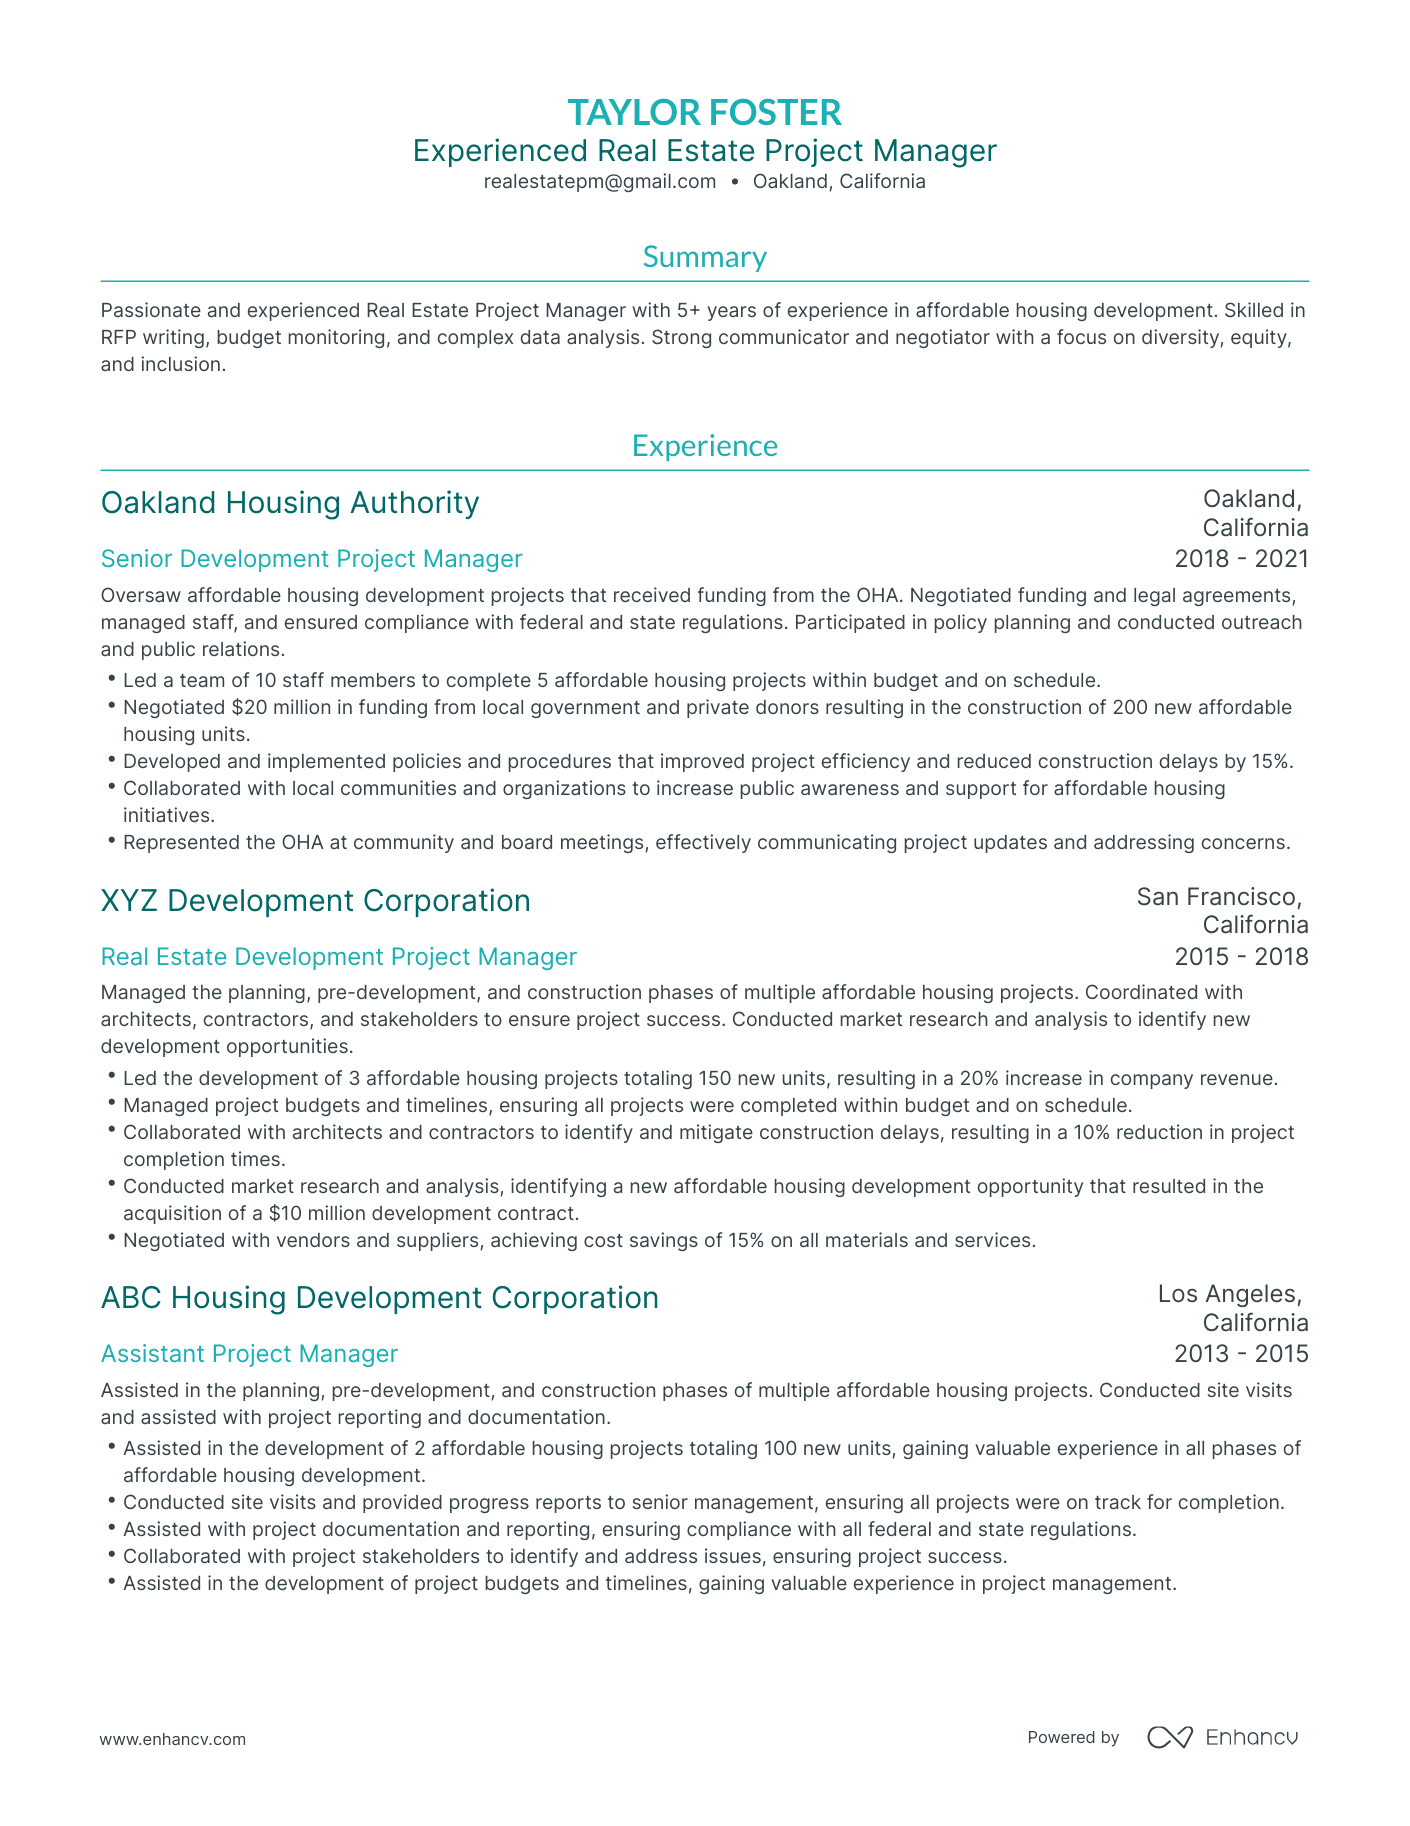 Traditional Real Estate Project Manager Resume Template